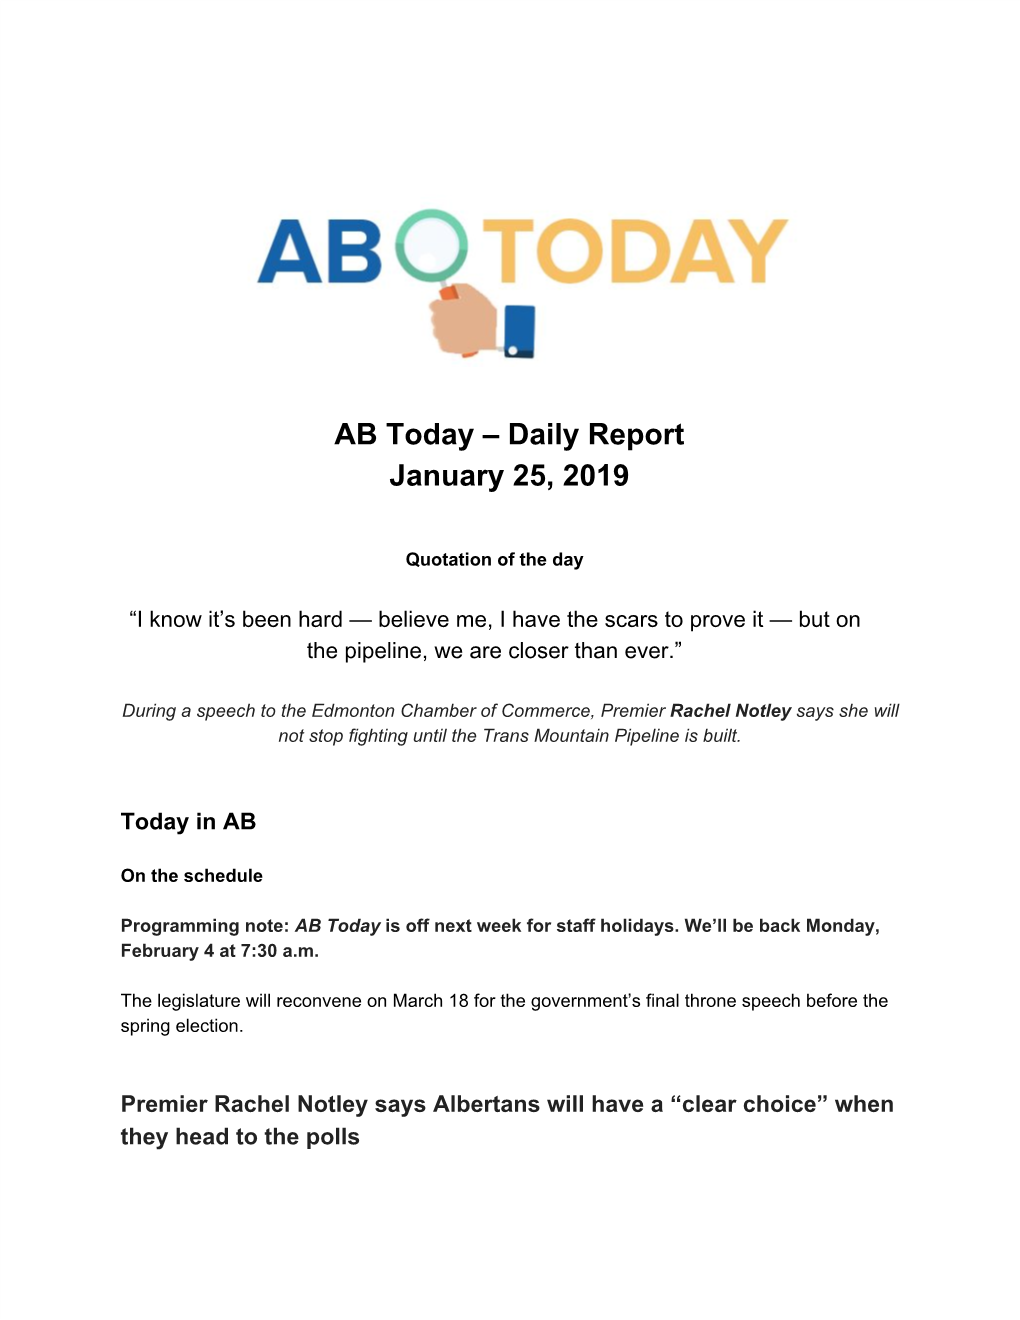 AB Today – Daily Report January 25, 2019